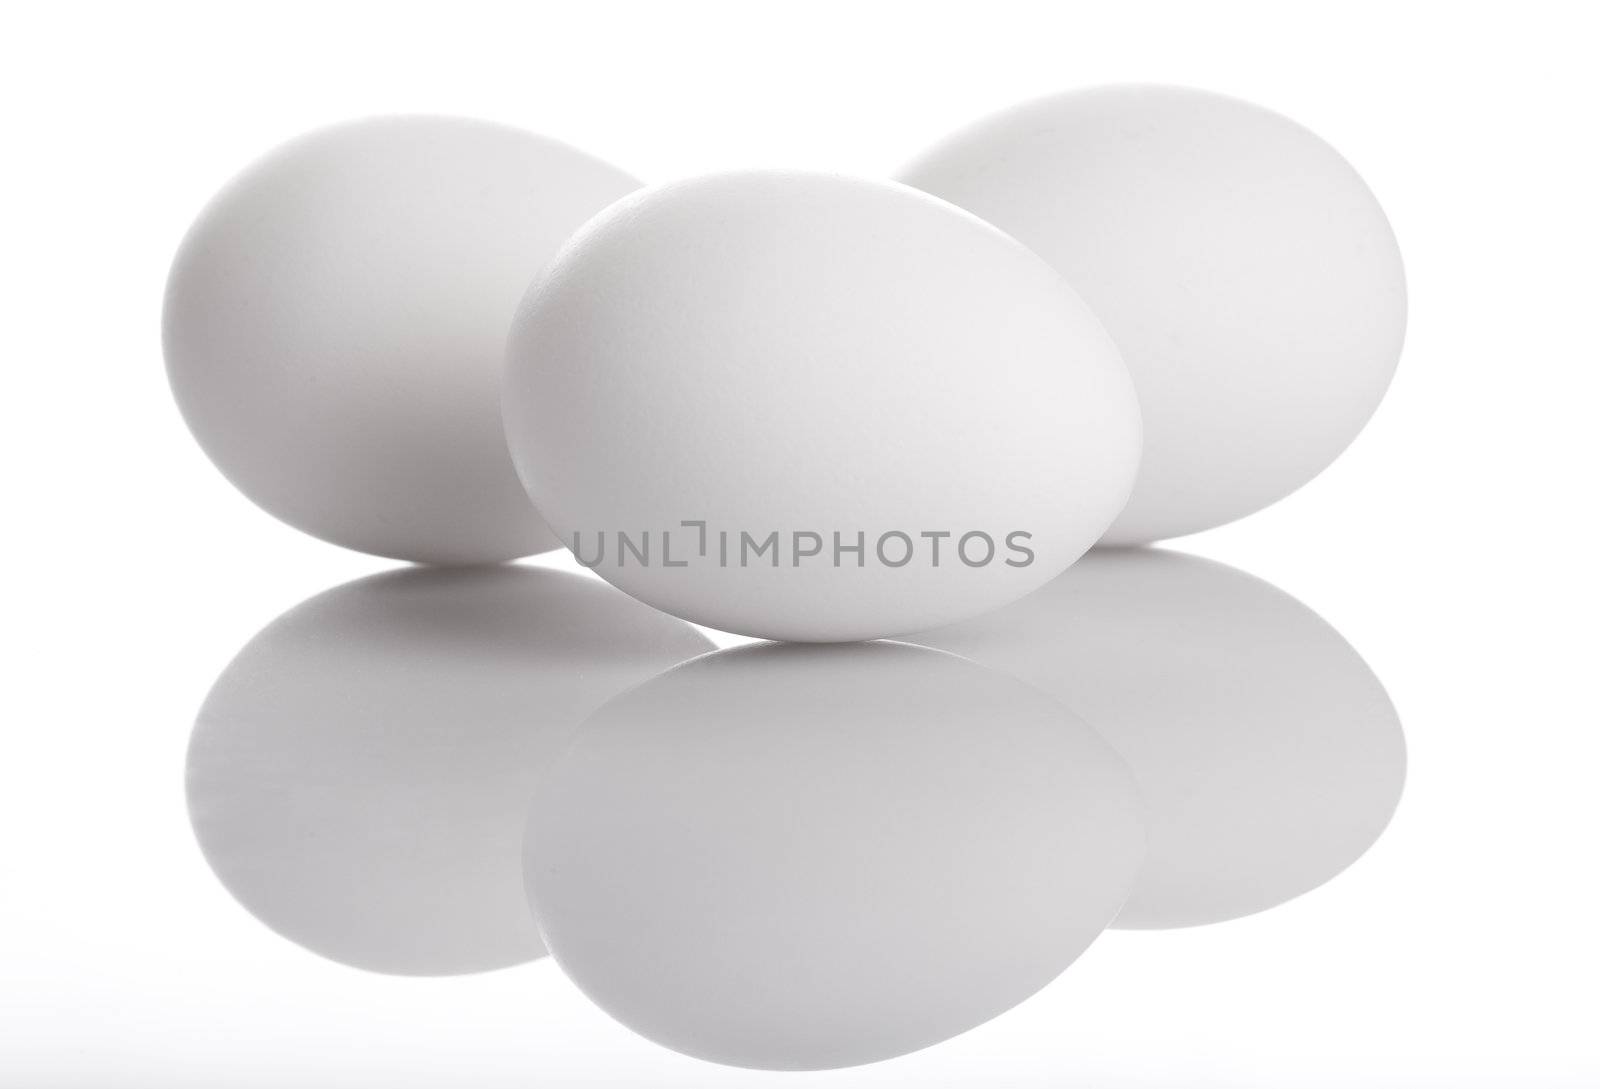 Three white eggs and their reflection